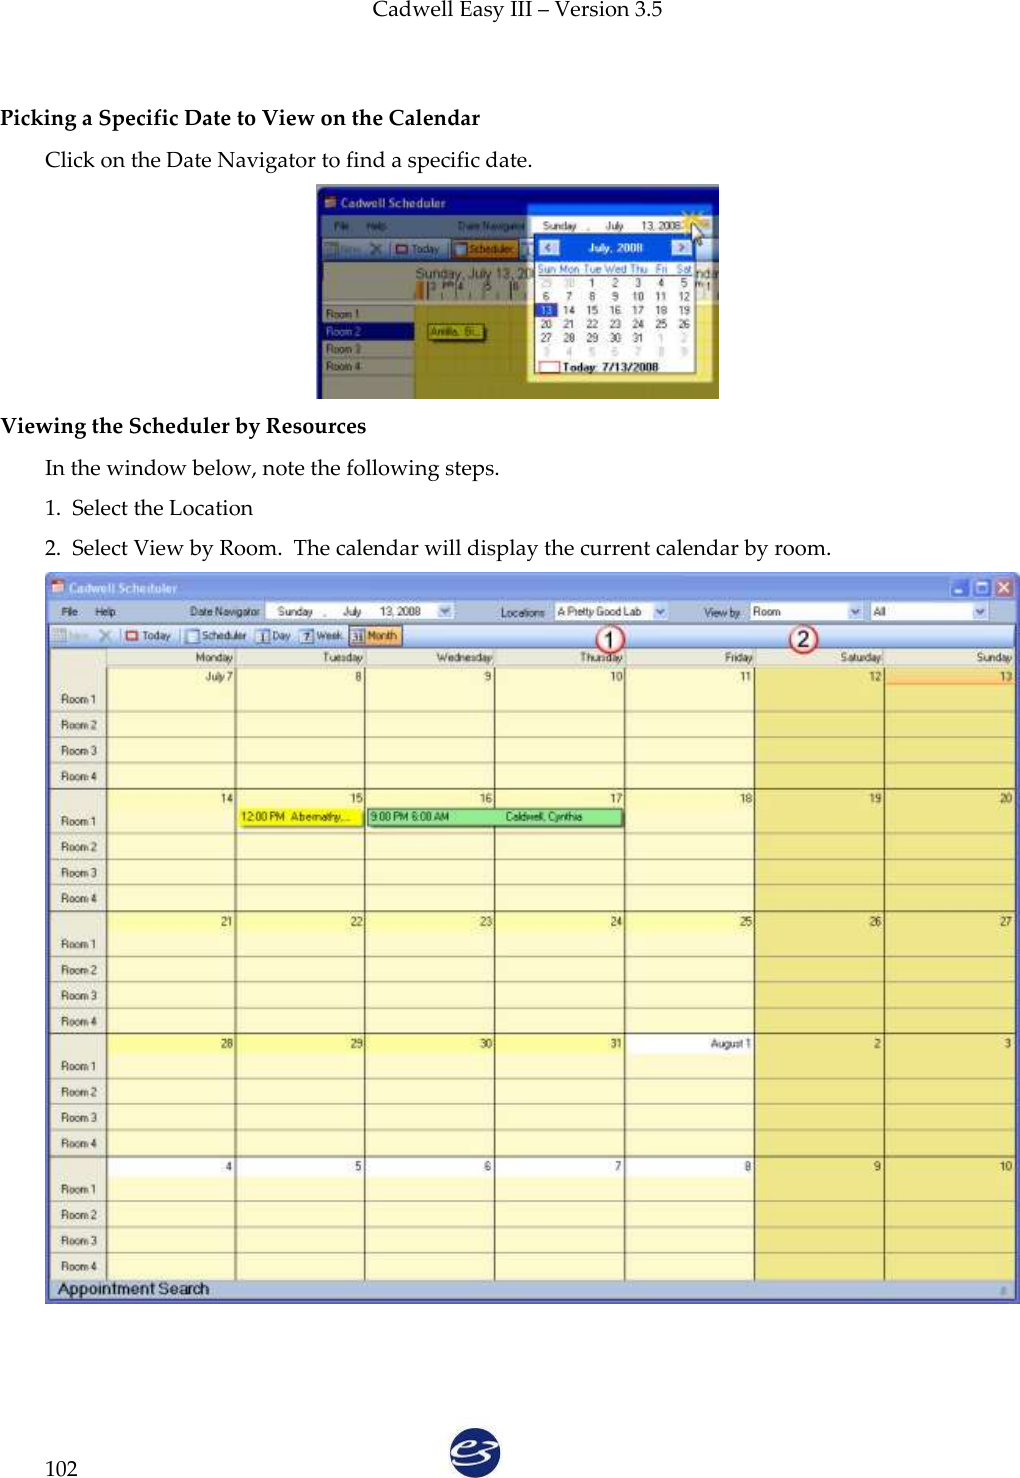 Cadwell Easy III – Version 3.5   102  Picking a Specific Date to View on the Calendar Click on the Date Navigator to find a specific date.  Viewing the Scheduler by Resources In the window below, note the following steps. 1.  Select the Location 2.  Select View by Room.  The calendar will display the current calendar by room.   